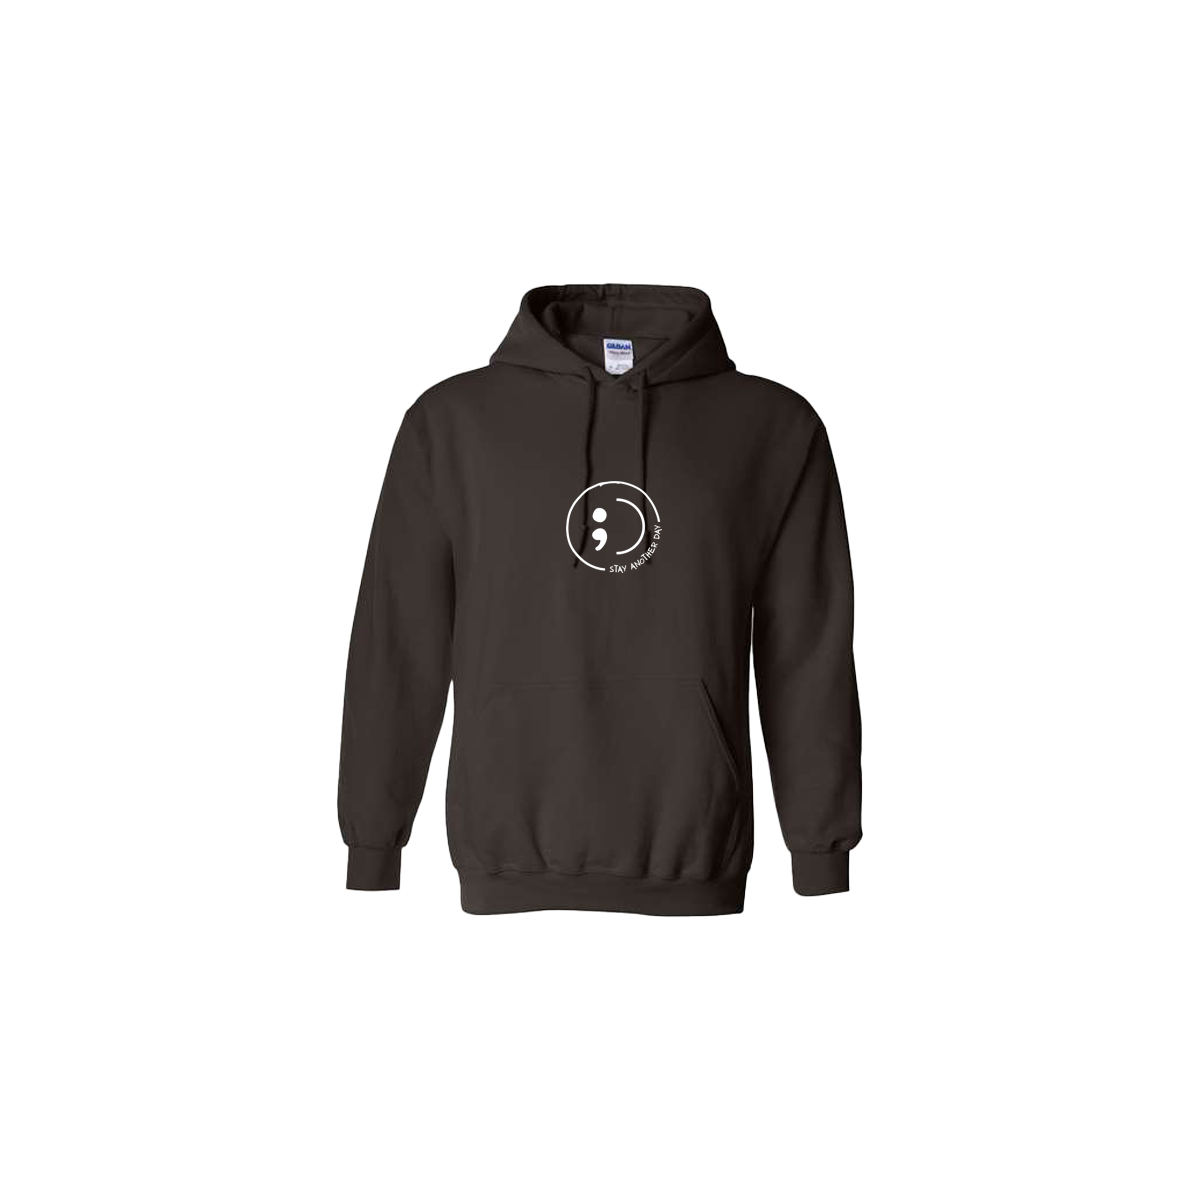 Stay Another Day Smiley with text Embroidered Brown Hoodie - Mental Health Awareness Clothing